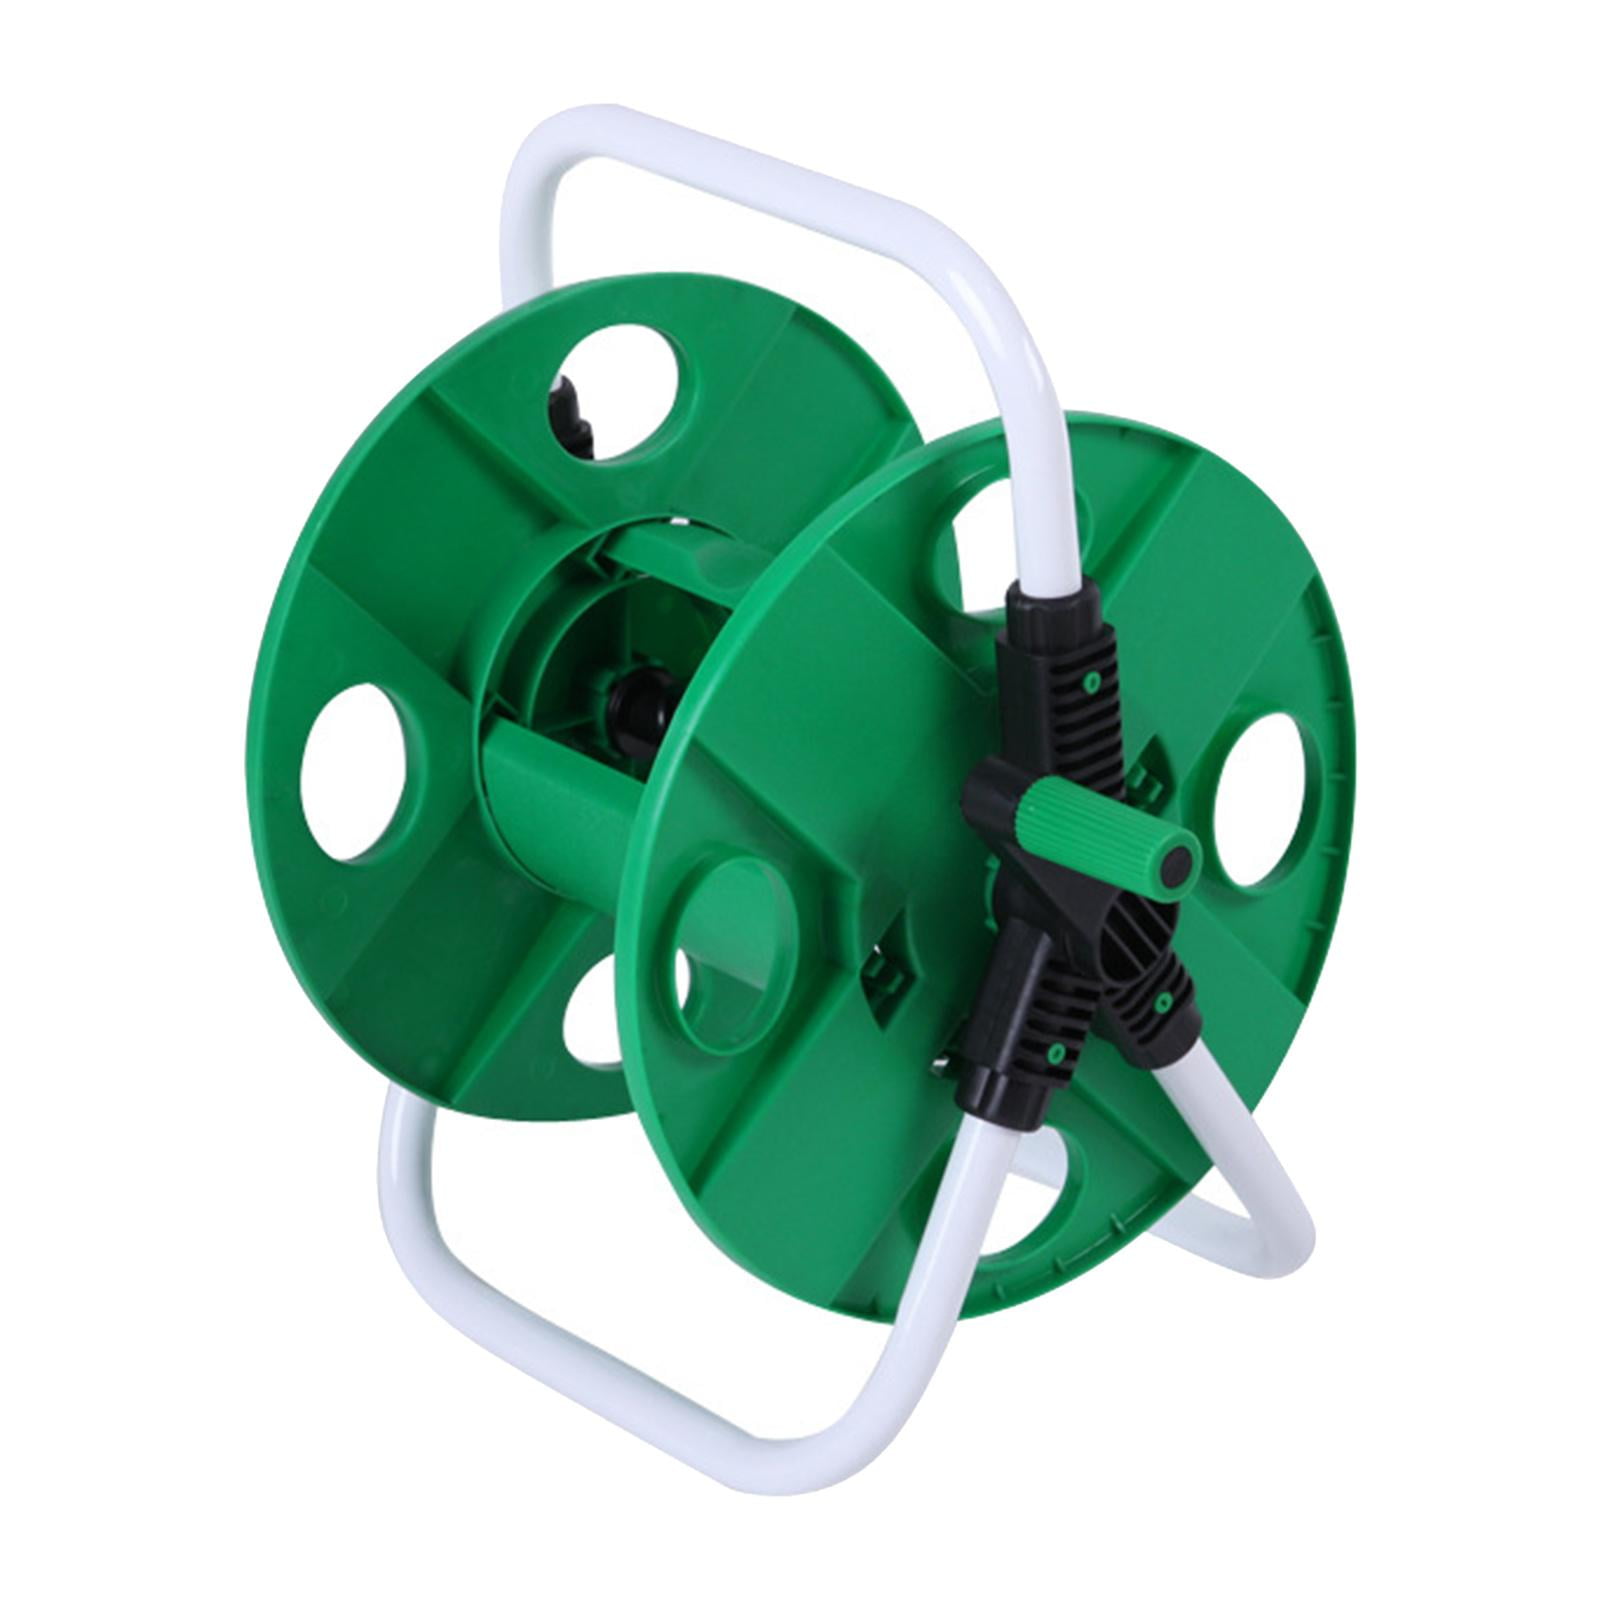 2-in-1 Compact Garden Hose Pipe Wall Mounted Reel with 25m Hose +